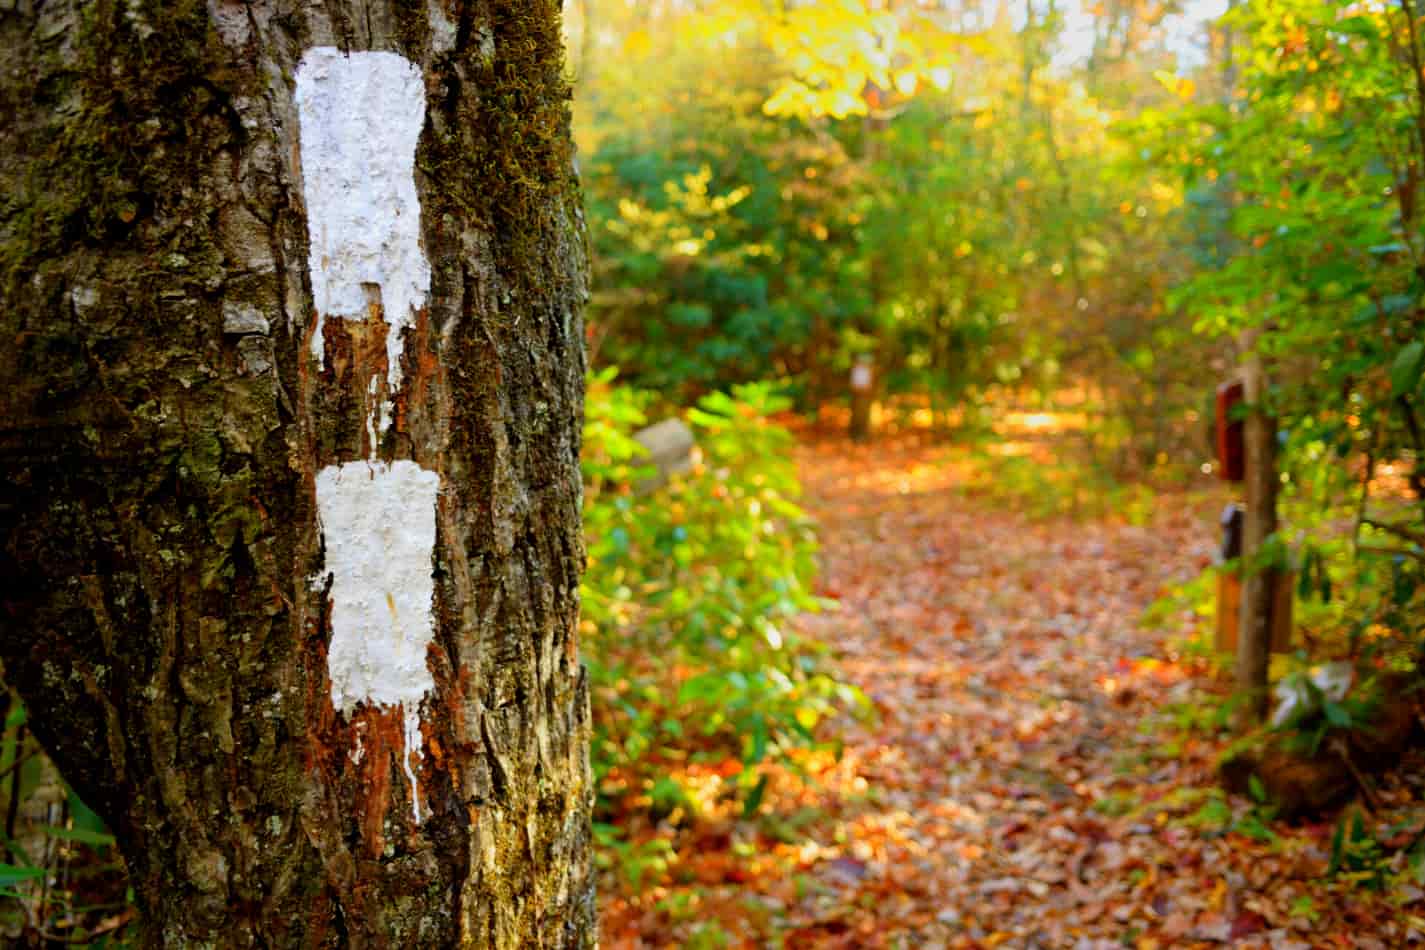 Double white blaze on the appalachian Trail marked on a tree showing you the way forward. Trail markings are important to hiker's success!